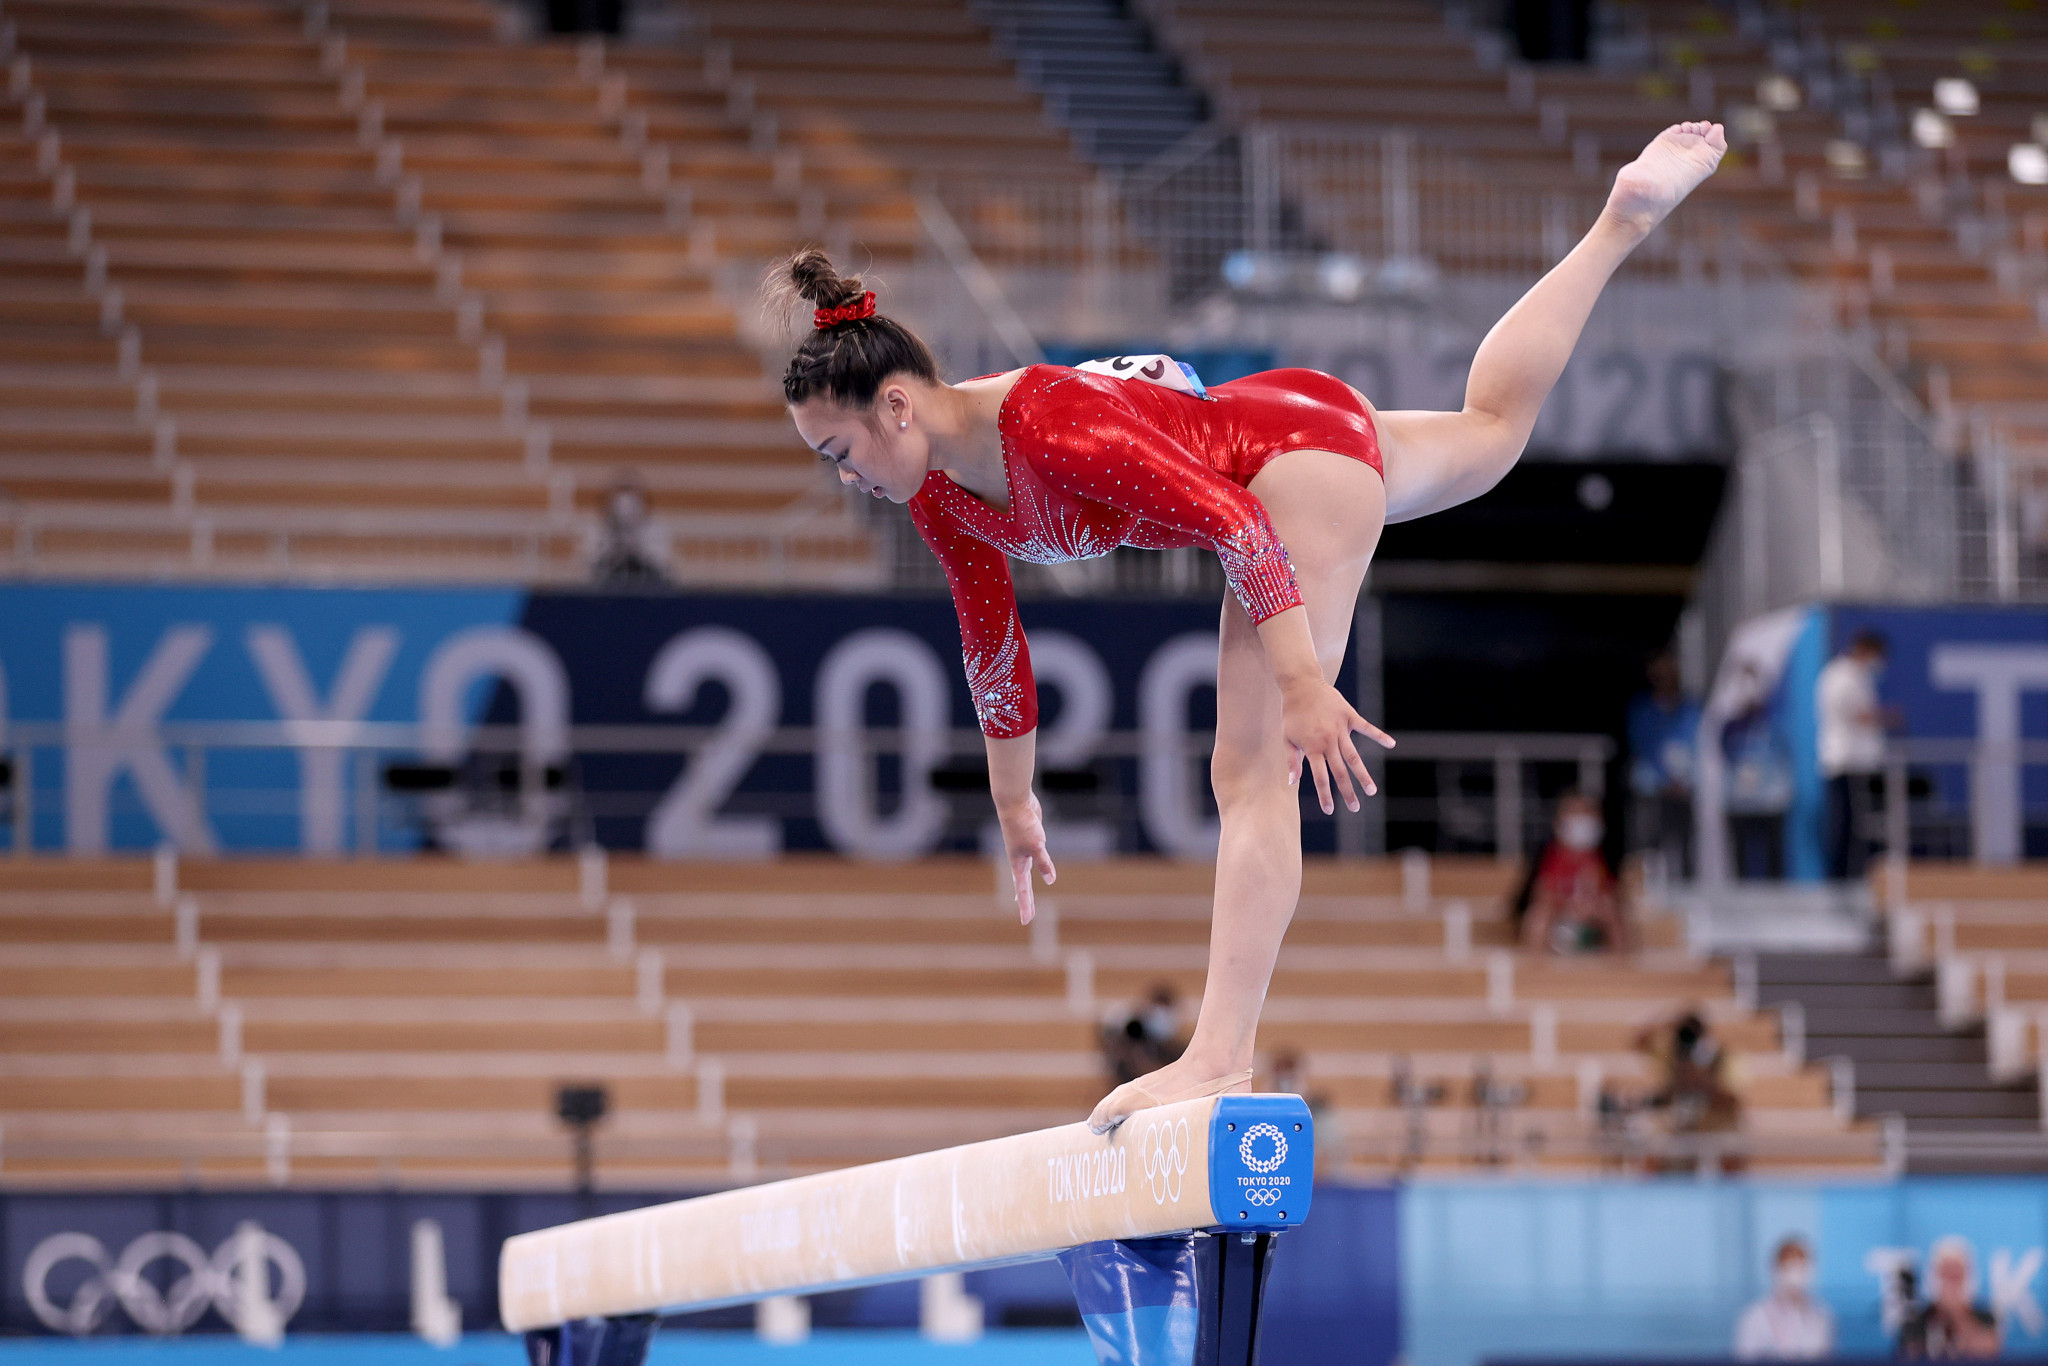 Olympic all-around champion Suni Lee insists she wants to experience the 